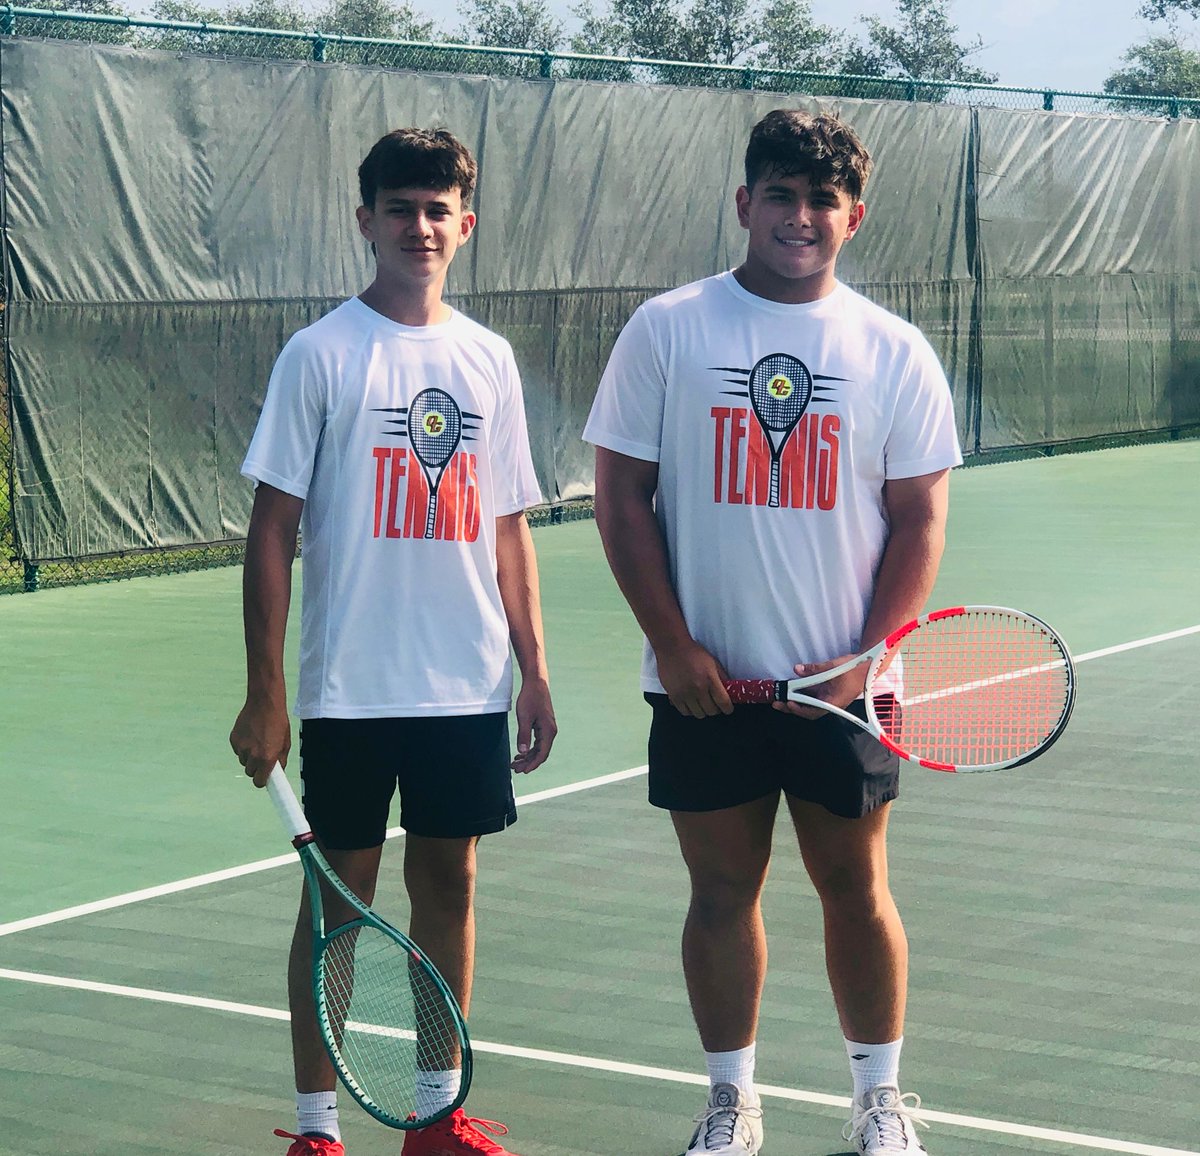 Dom and Drake are taking the court to battle in the DISTRICT CHAMPIONSHIP MATCH! Go get em boys!! #ChampionMindset